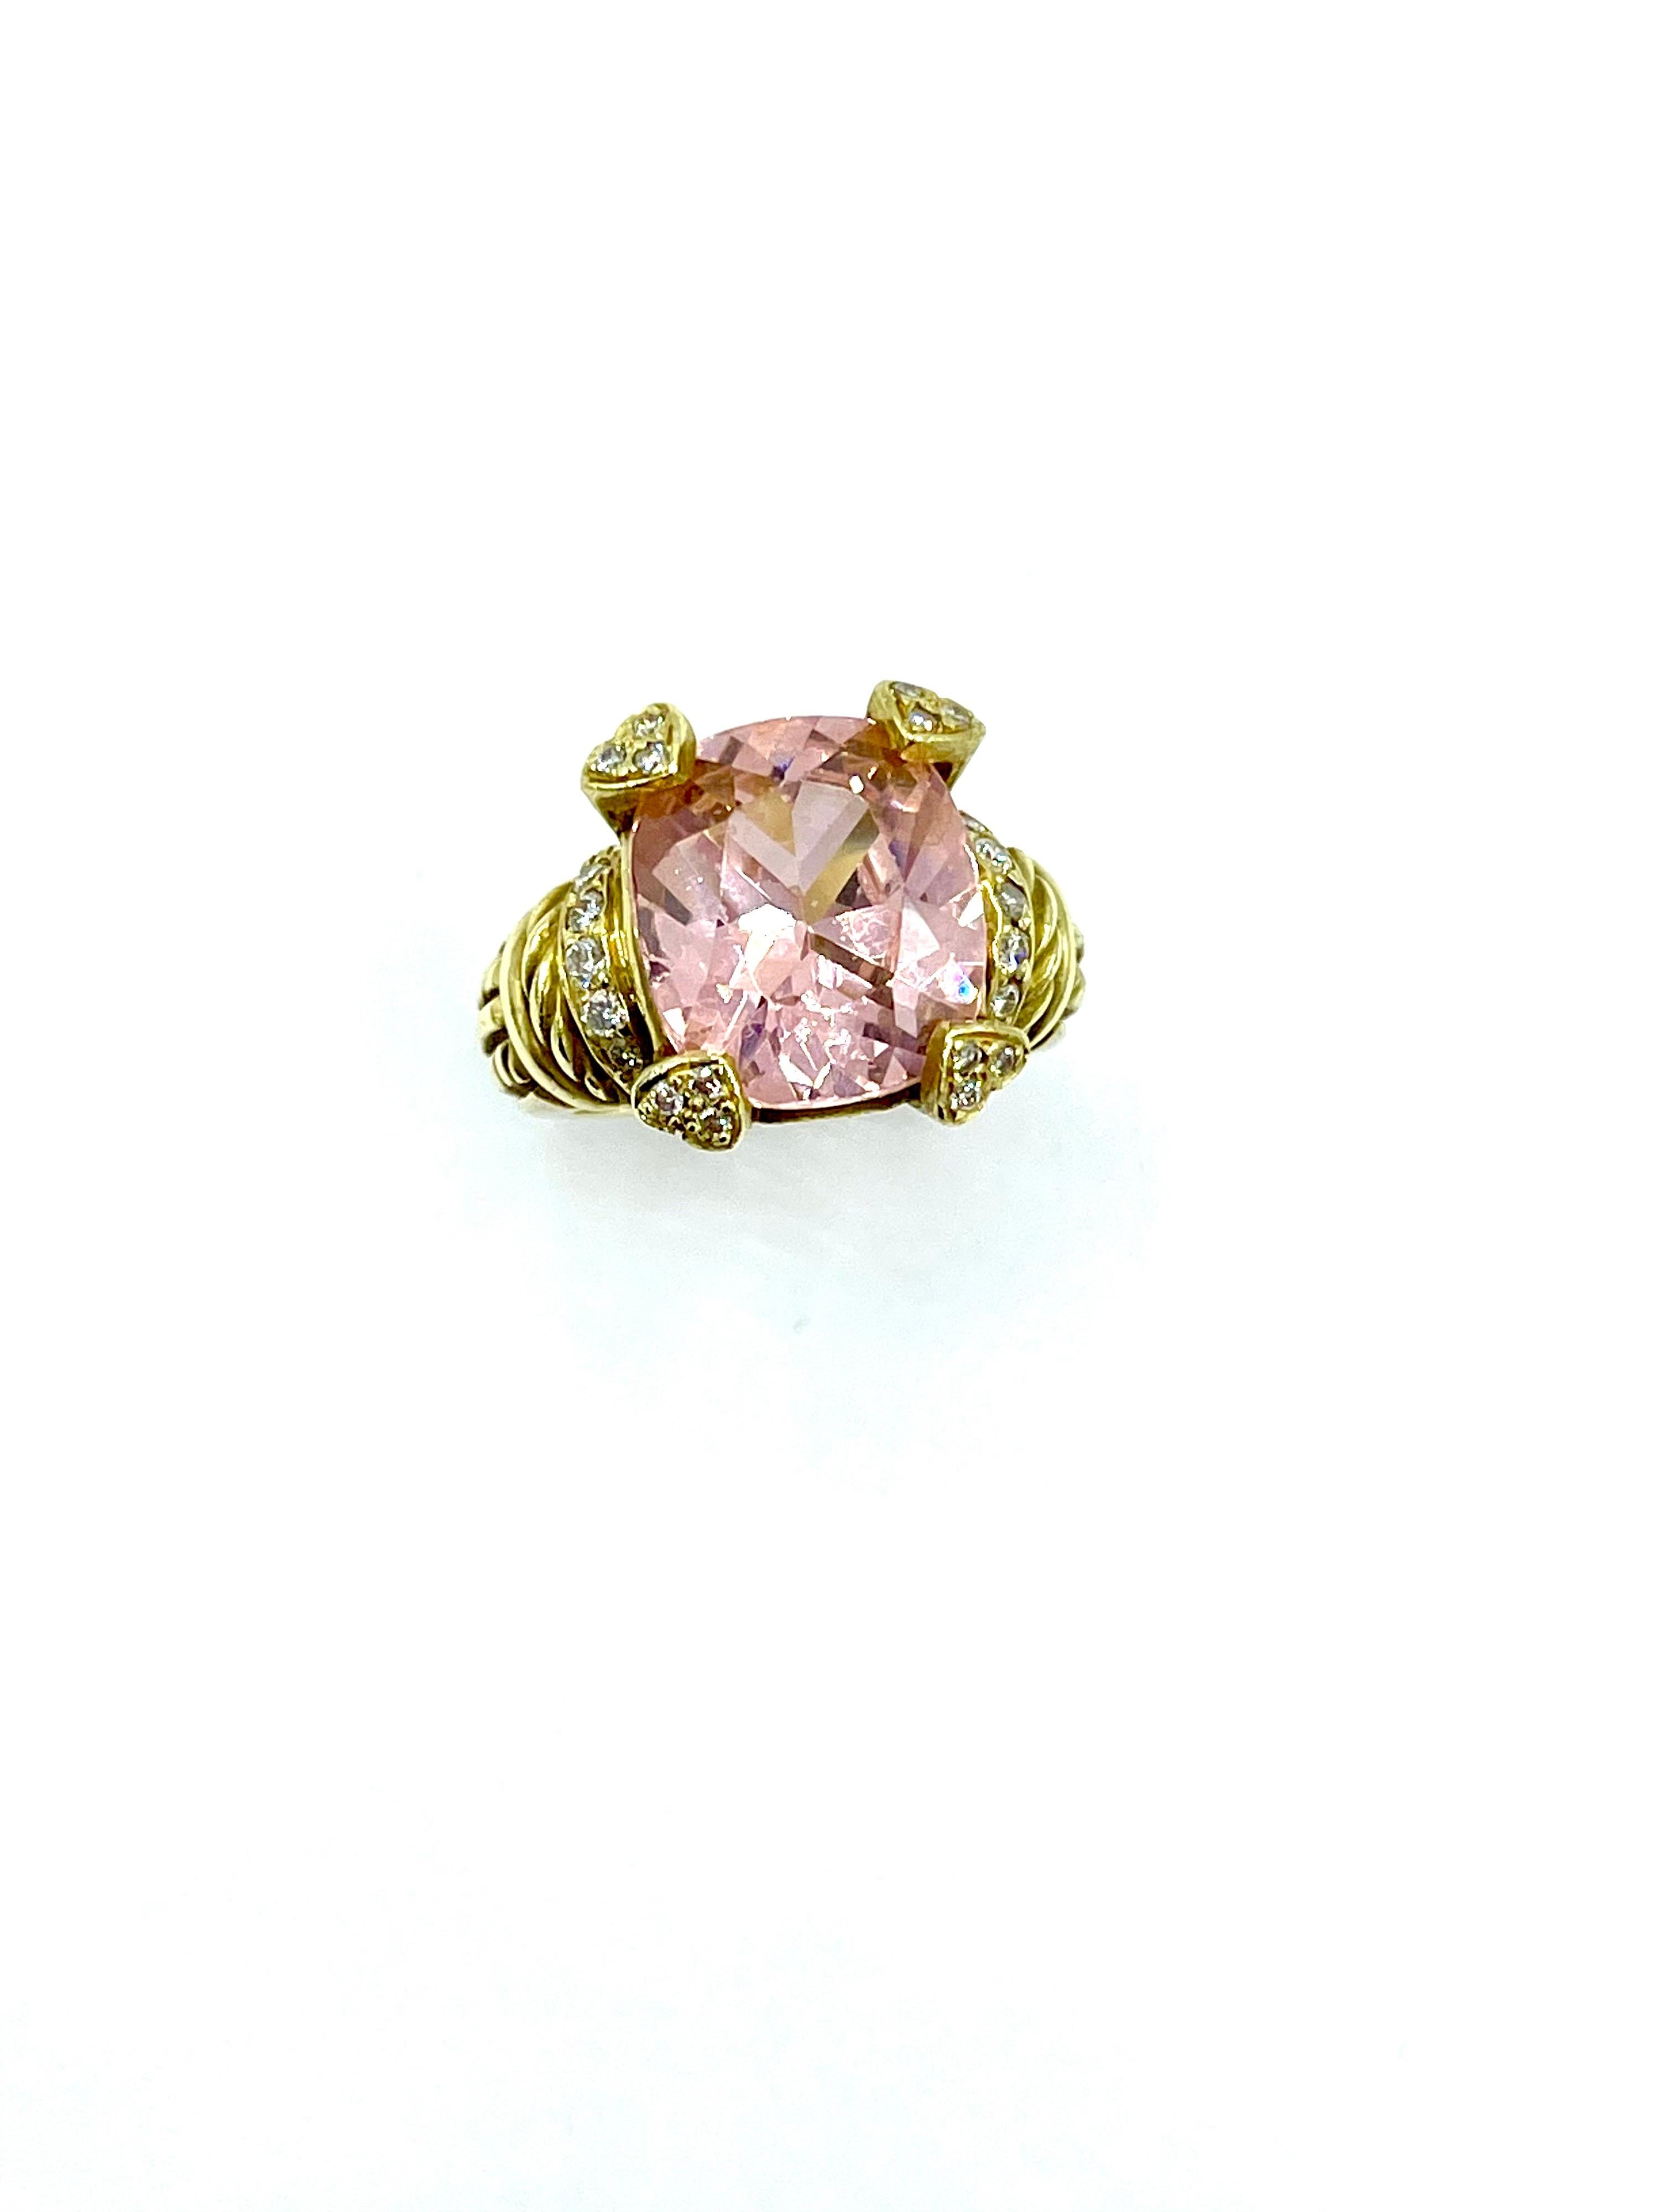 A beautifully vibrant 6.89 carat cushion cut pink quartz and diamond cocktail ring designed by Judith Ripka.  The quartz is set with with four diamond double prongs, with a single row of round brilliant diamonds on each side.  There is a total of